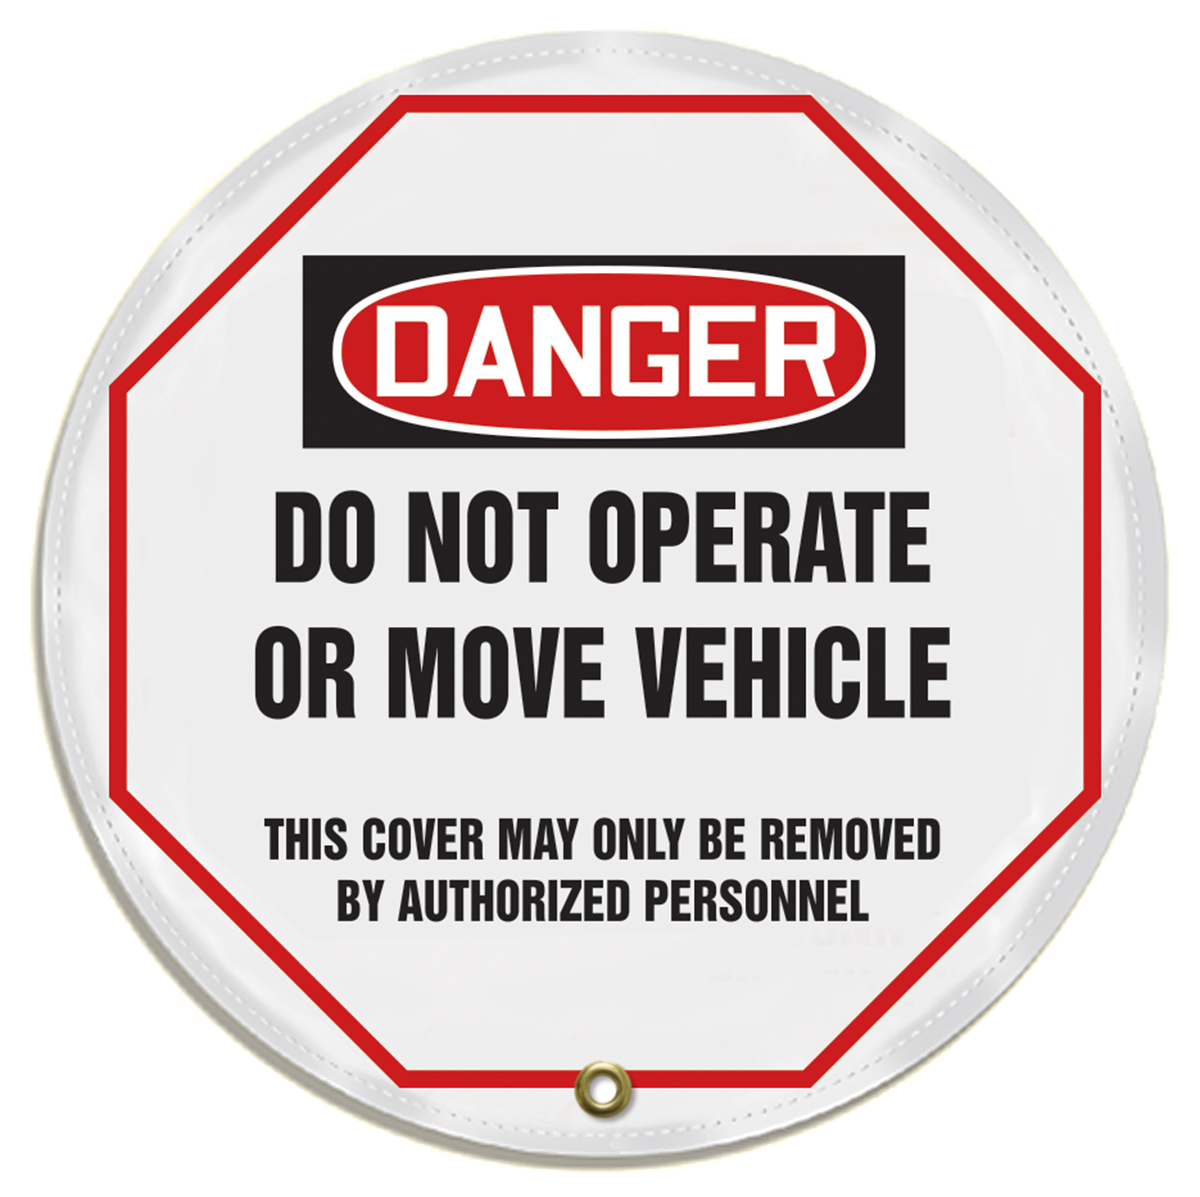 DO NOT OPERATE OR MOVE VEHICLE